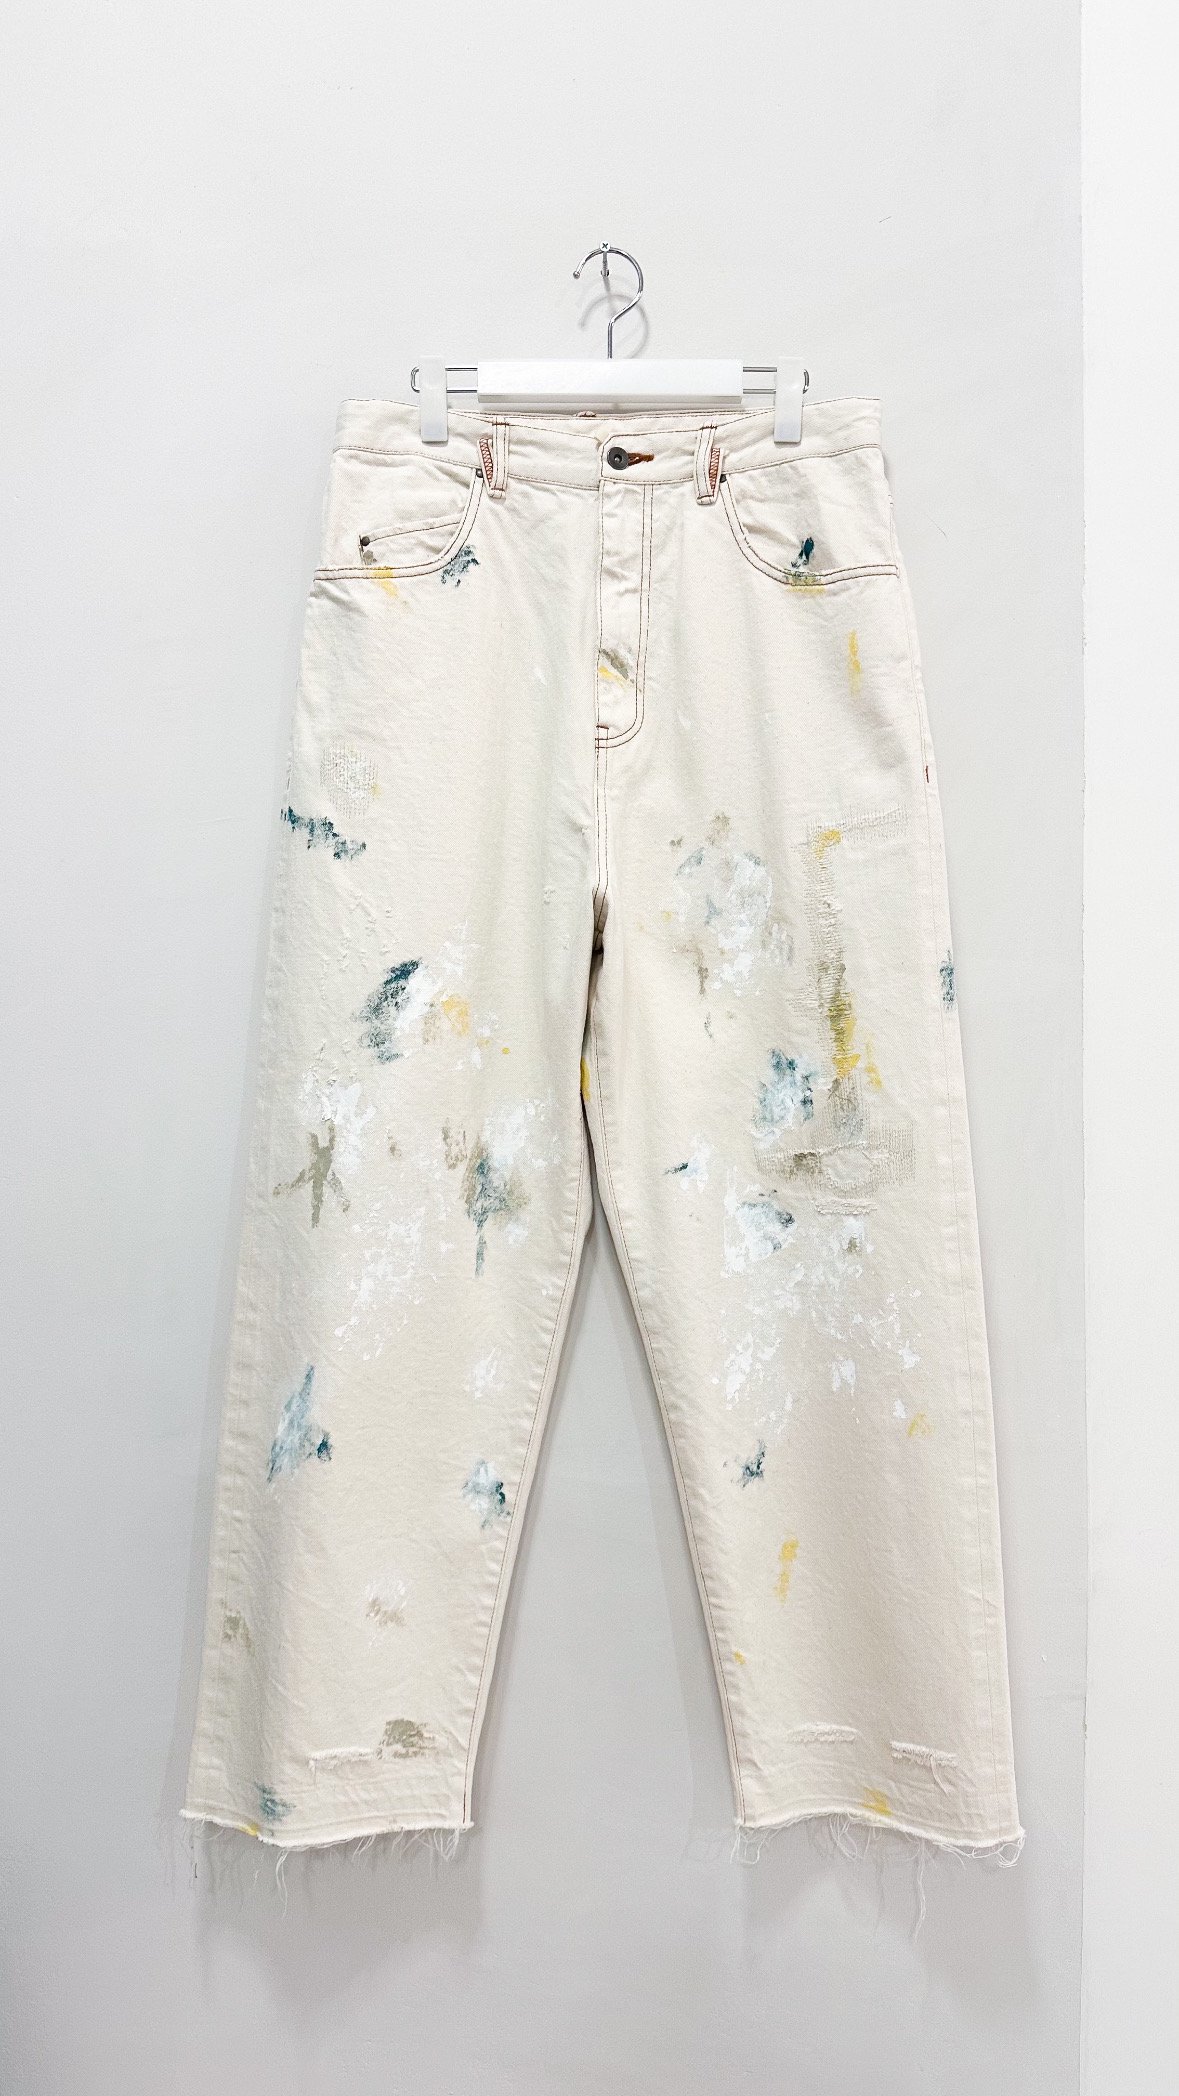 <img class='new_mark_img1' src='https://img.shop-pro.jp/img/new/icons47.gif' style='border:none;display:inline;margin:0px;padding:0px;width:auto;' />KAMATA DENIM TROUSERS TYPE01 -Remake Paint Vintage-